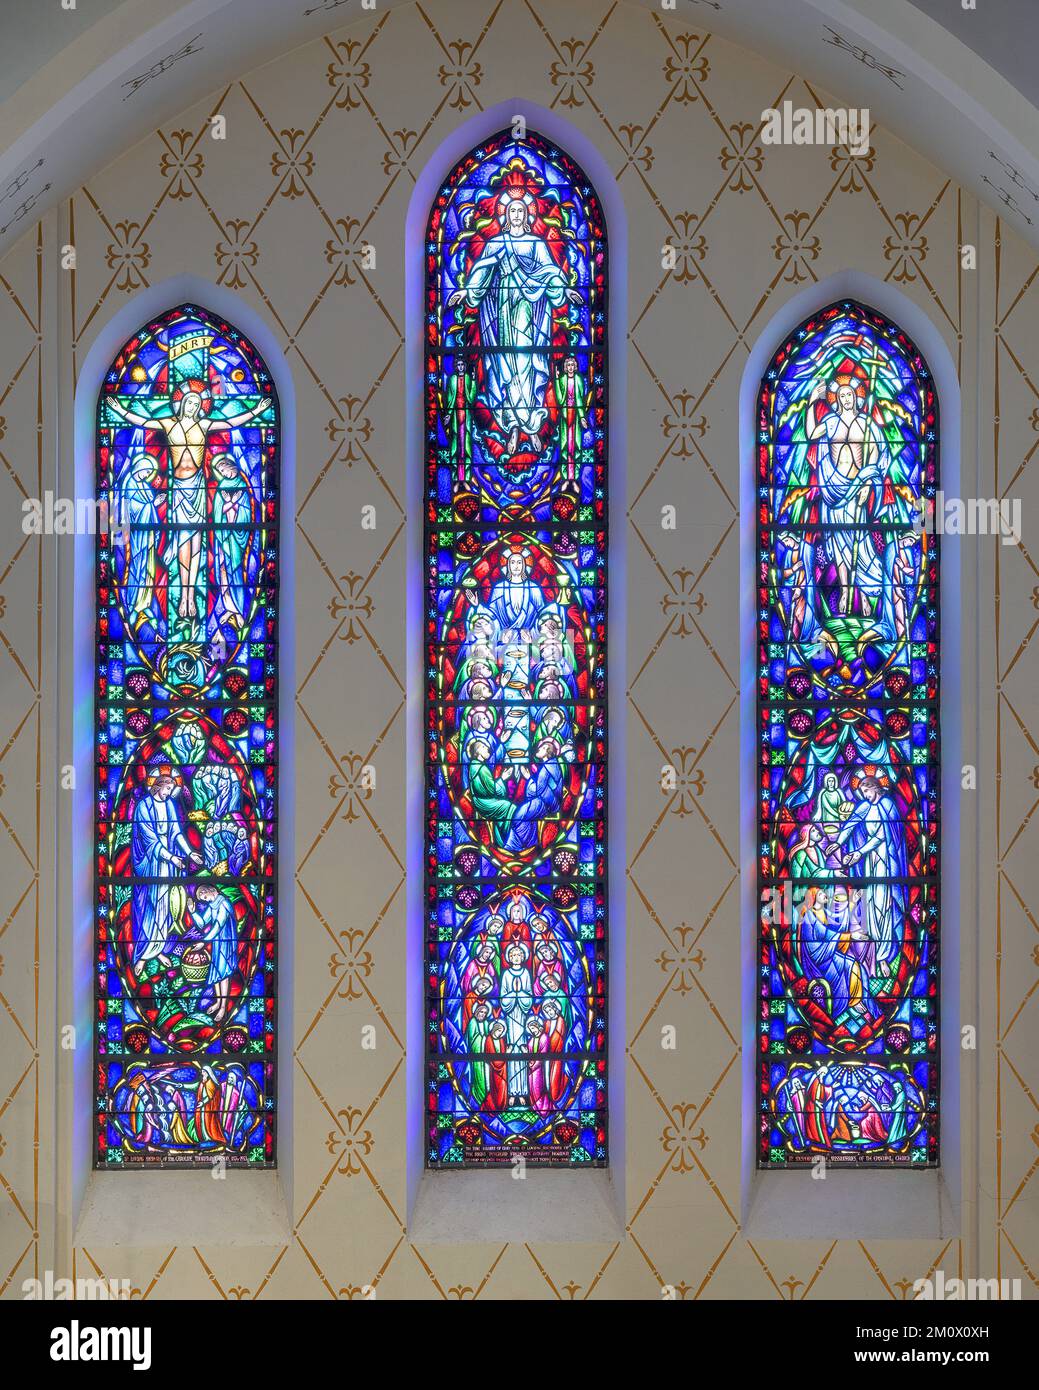 Three stained glass windows above the altar at the historic Cathedral of St. John in downtown Albuquerque, New Mexico Stock Photo